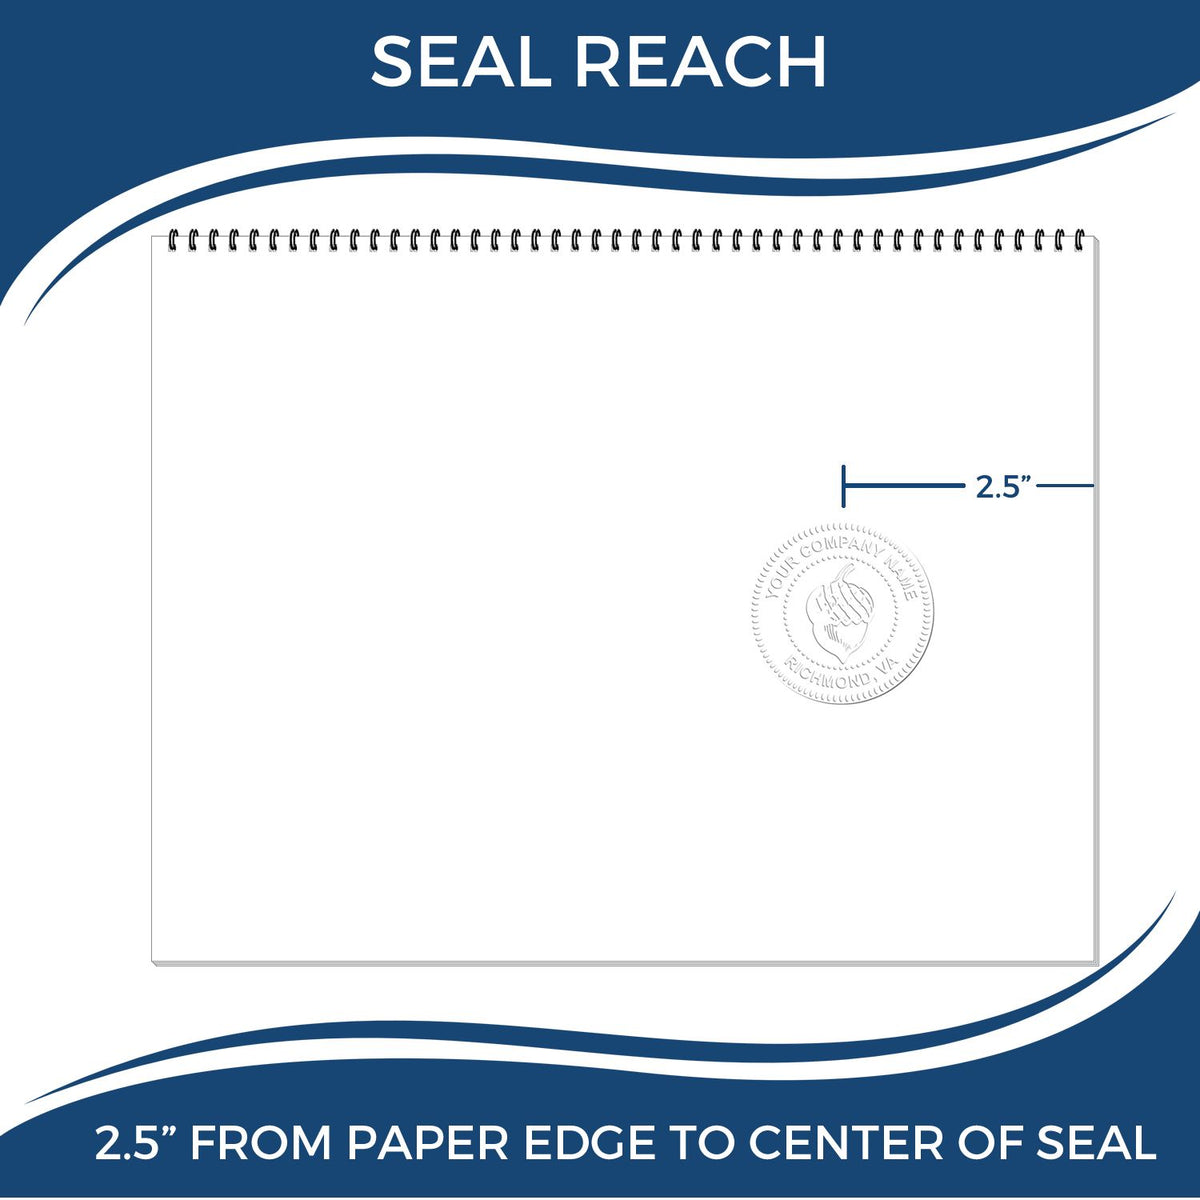 An infographic showing the seal reach which is represented by a ruler and a miniature seal image of the Long Reach Nebraska Land Surveyor Seal